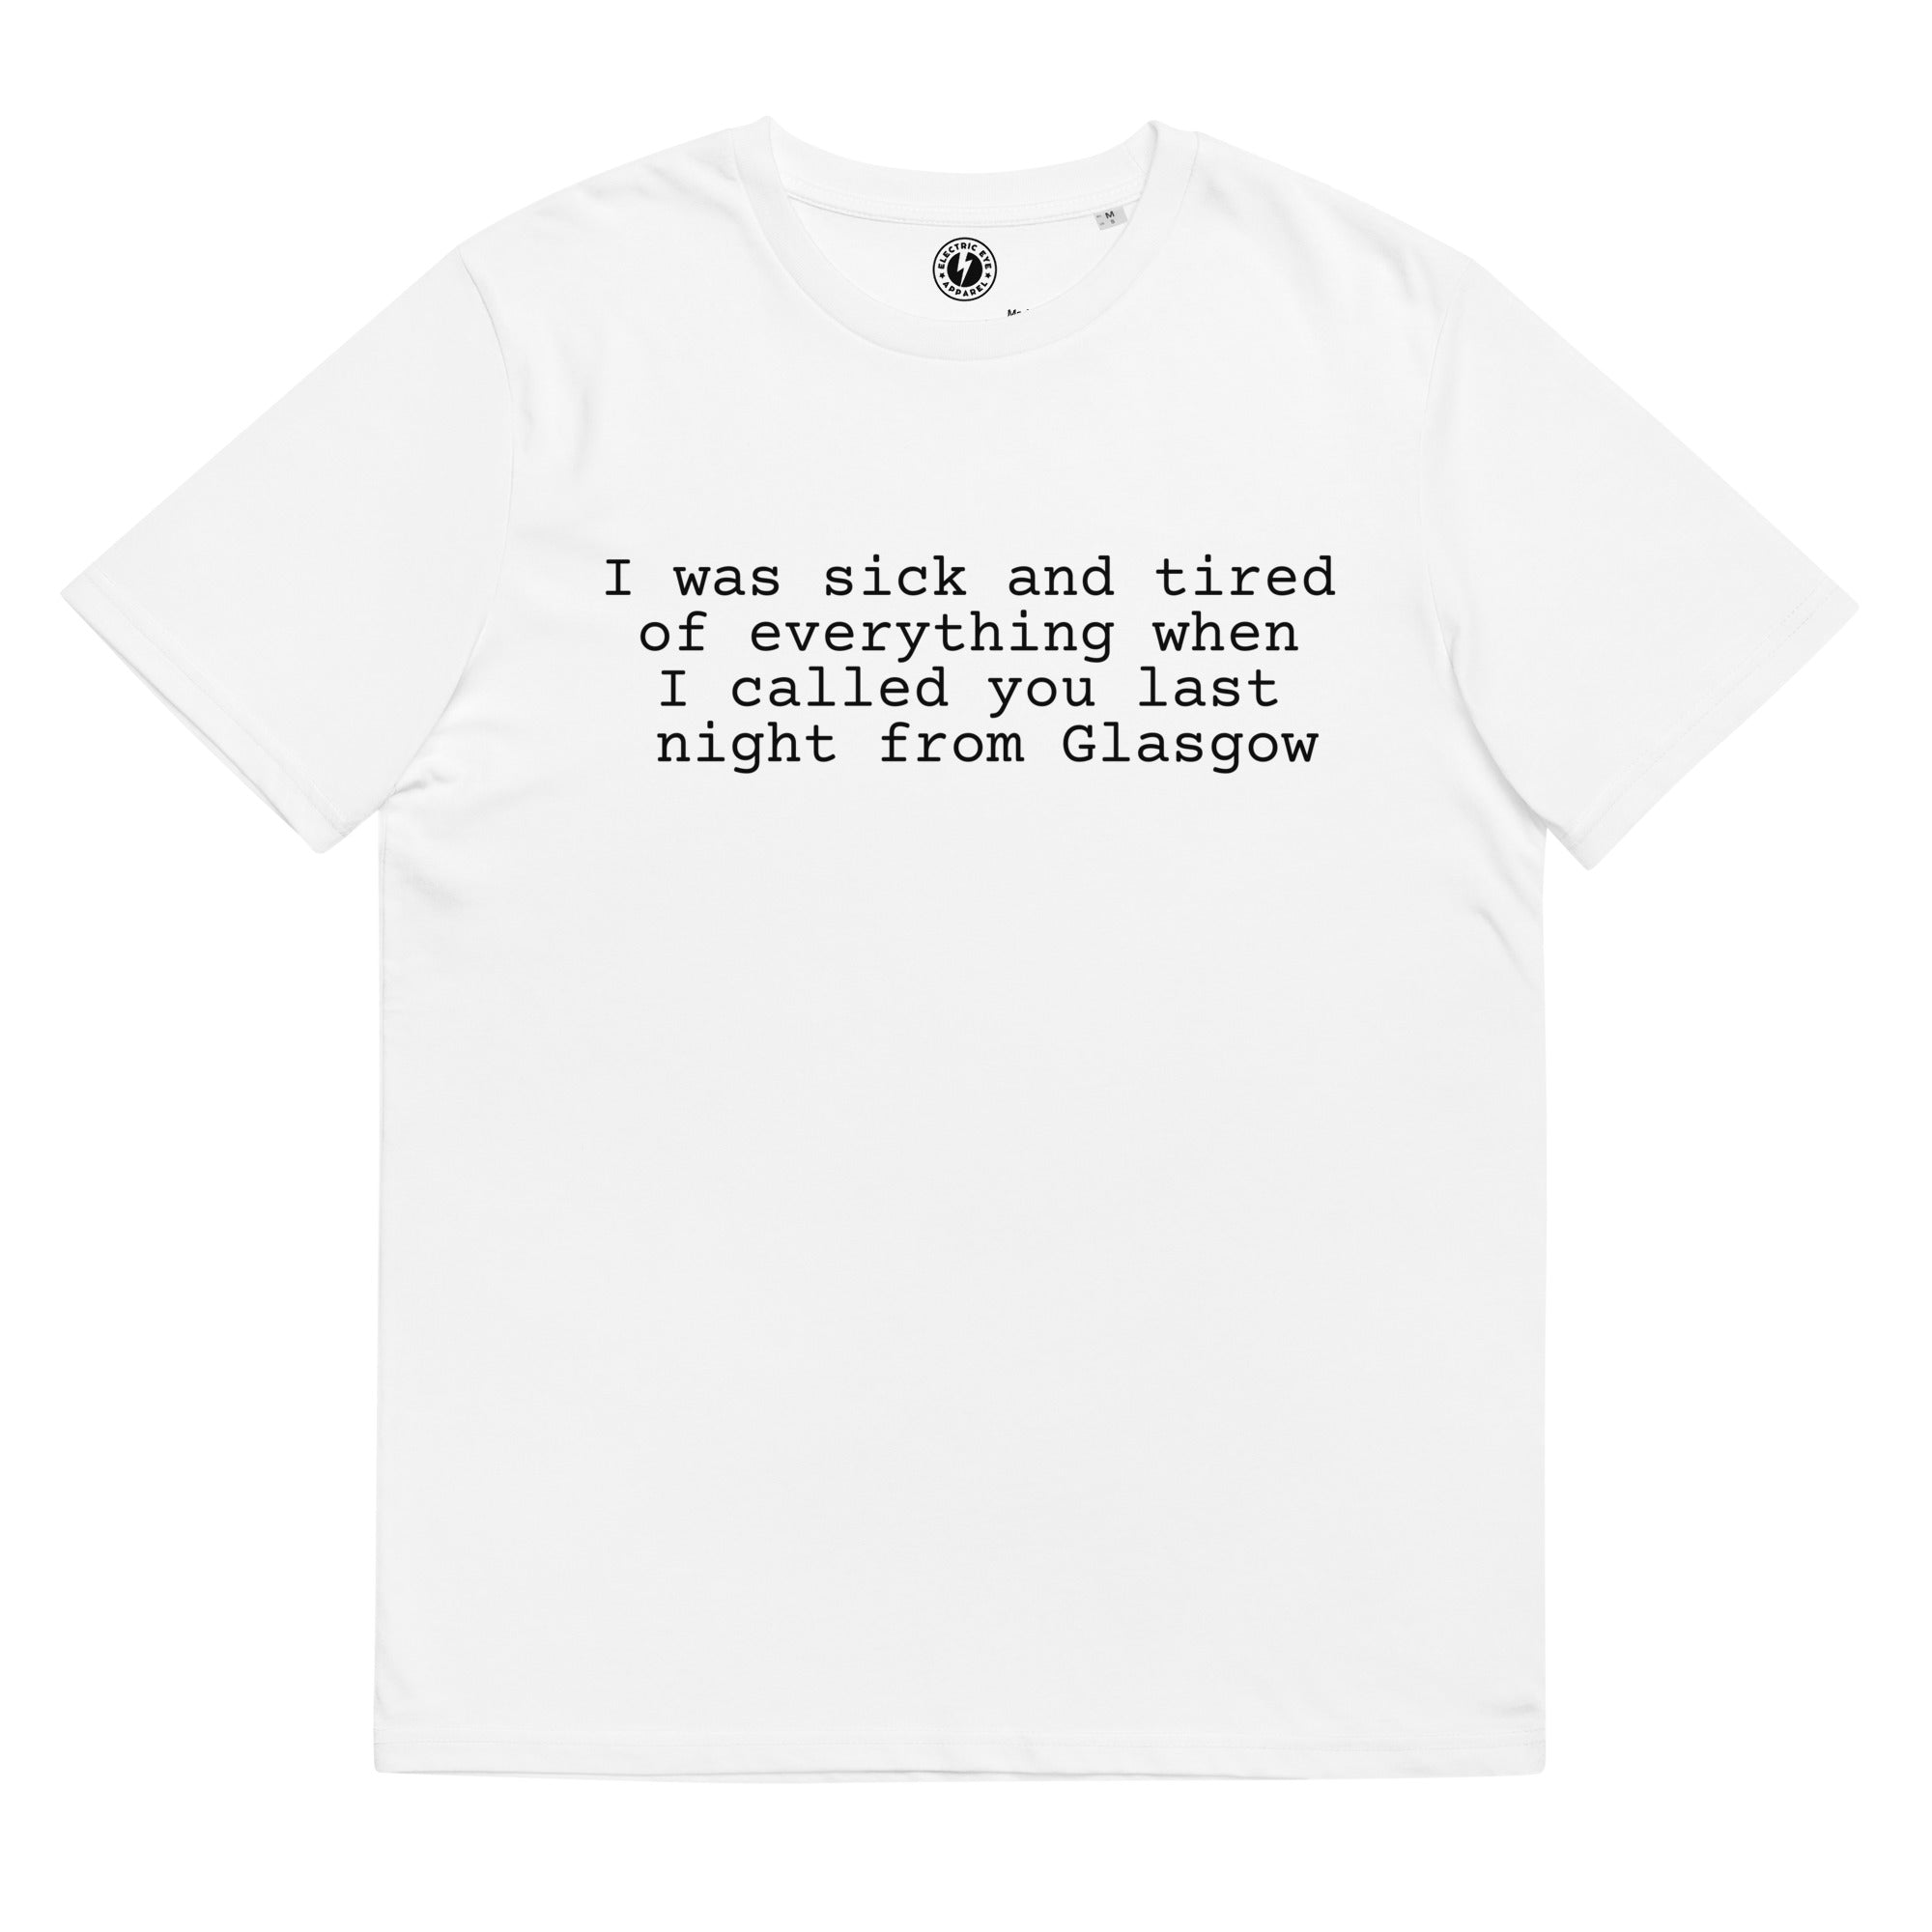 I Was Sick And Tired Of Everything When I Called You Last Night From Glasgow - Premium Lyric Printed Unisex organic cotton t-shirt - Black text